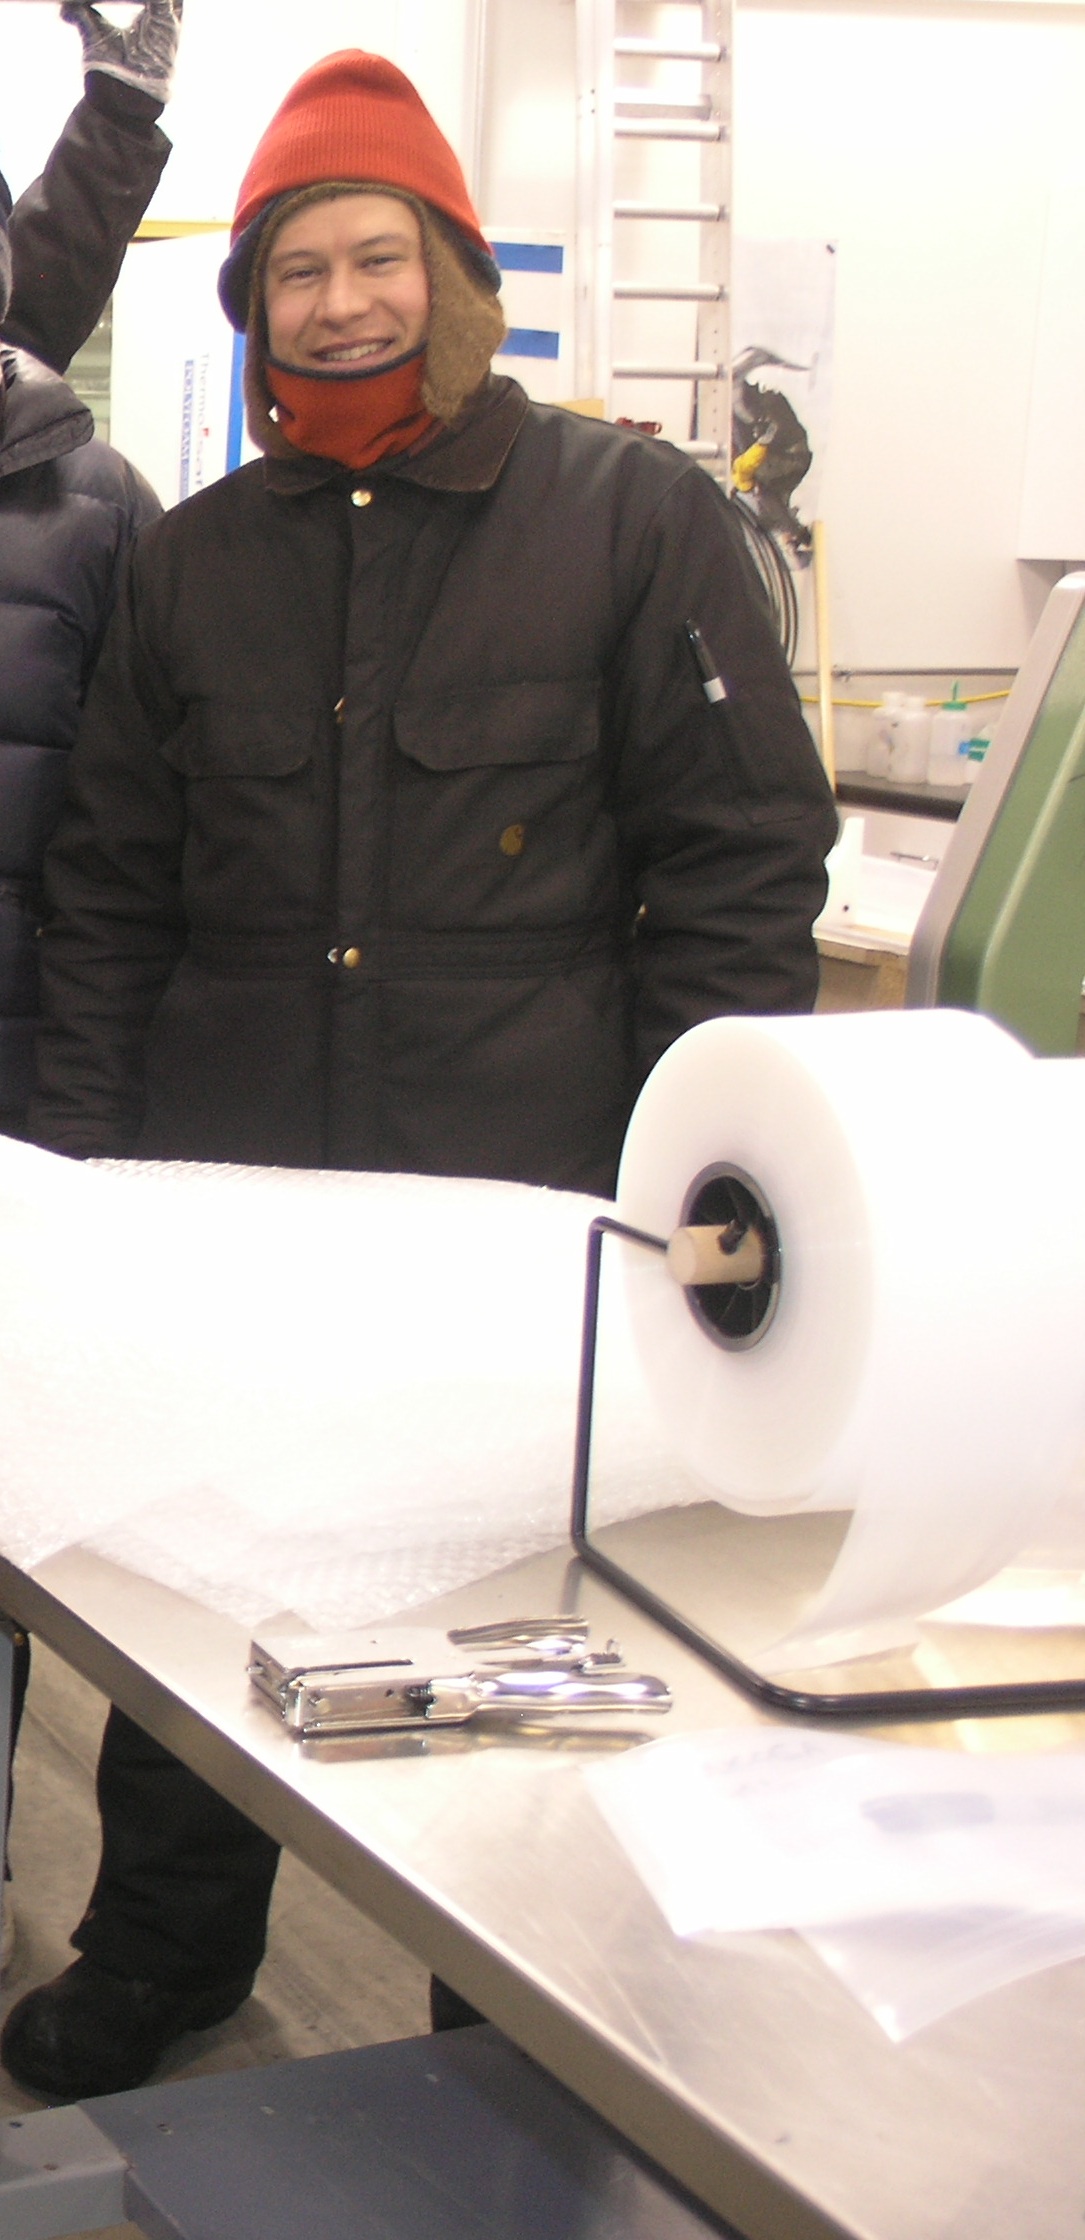 Eric Cravens during a core processing line at the National Ice Core Laboratory (NICL)